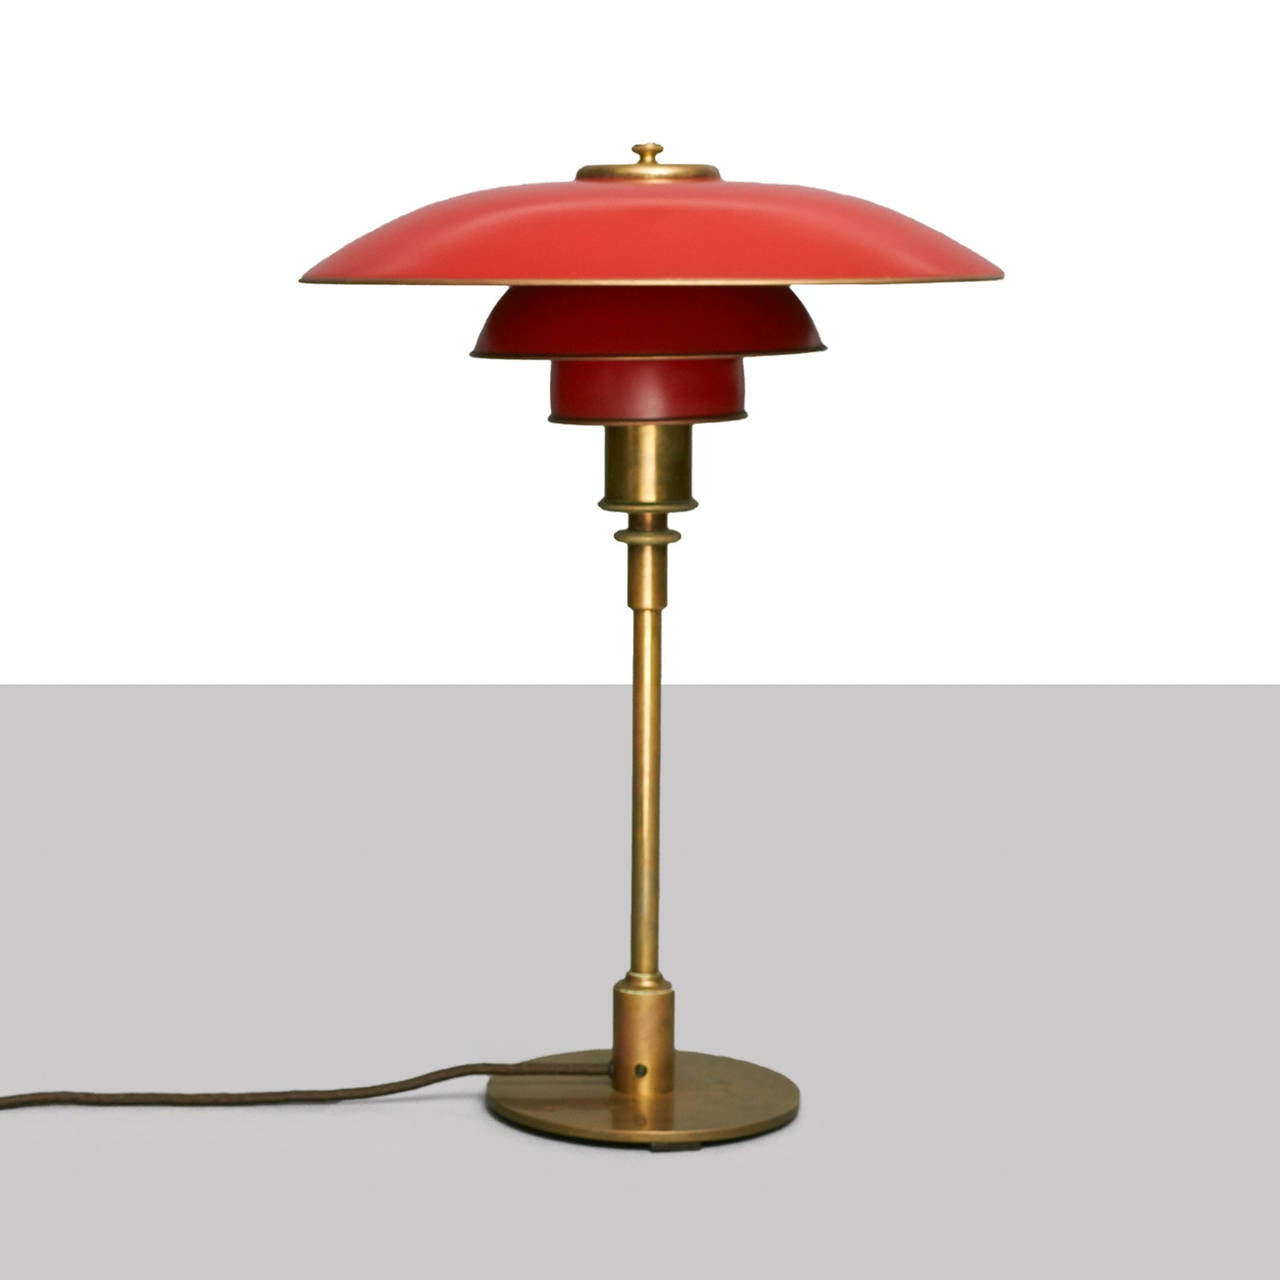 PH 4/3 table lamp with brass frame, red painted copper shades inside with reflector painting. Stamped Pat. Appl. Manufactured by Louis Poulsen, 1927-1928.